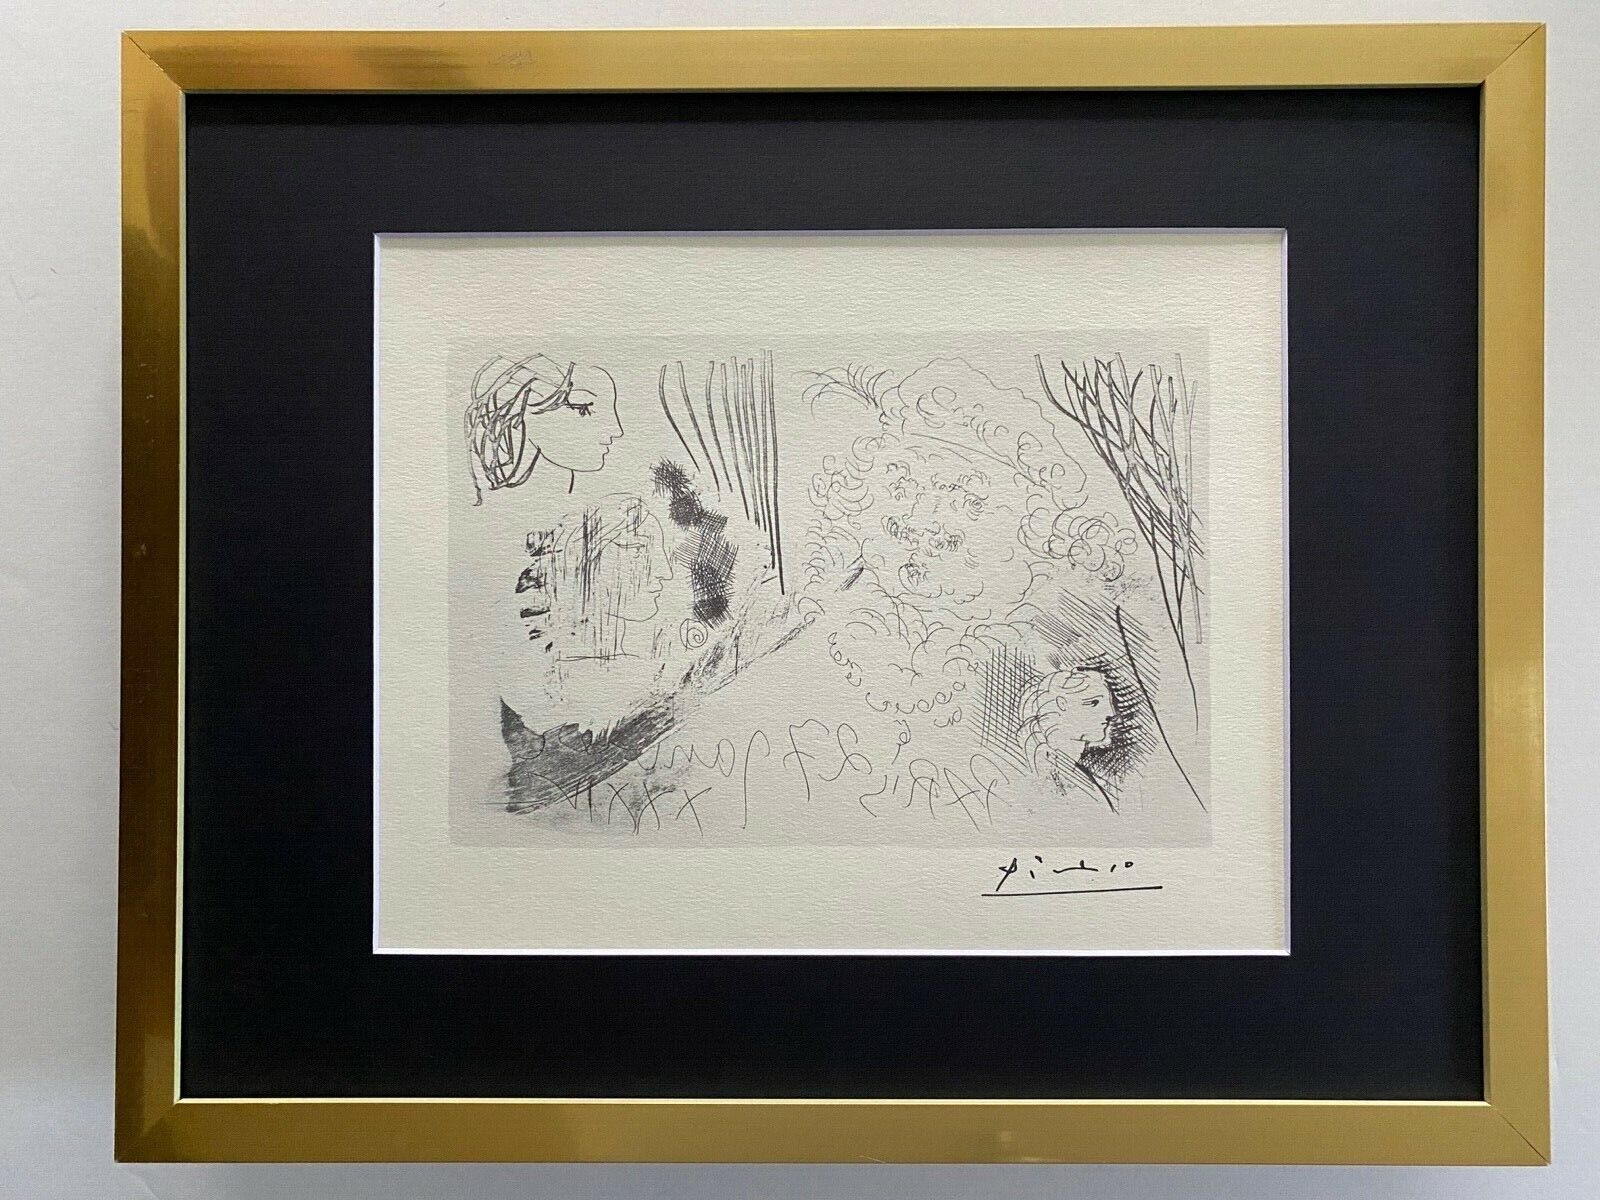 Pablo Picasso | Vintage 1956 Signed Lithograph | Matted and Framed | Ltd Edition